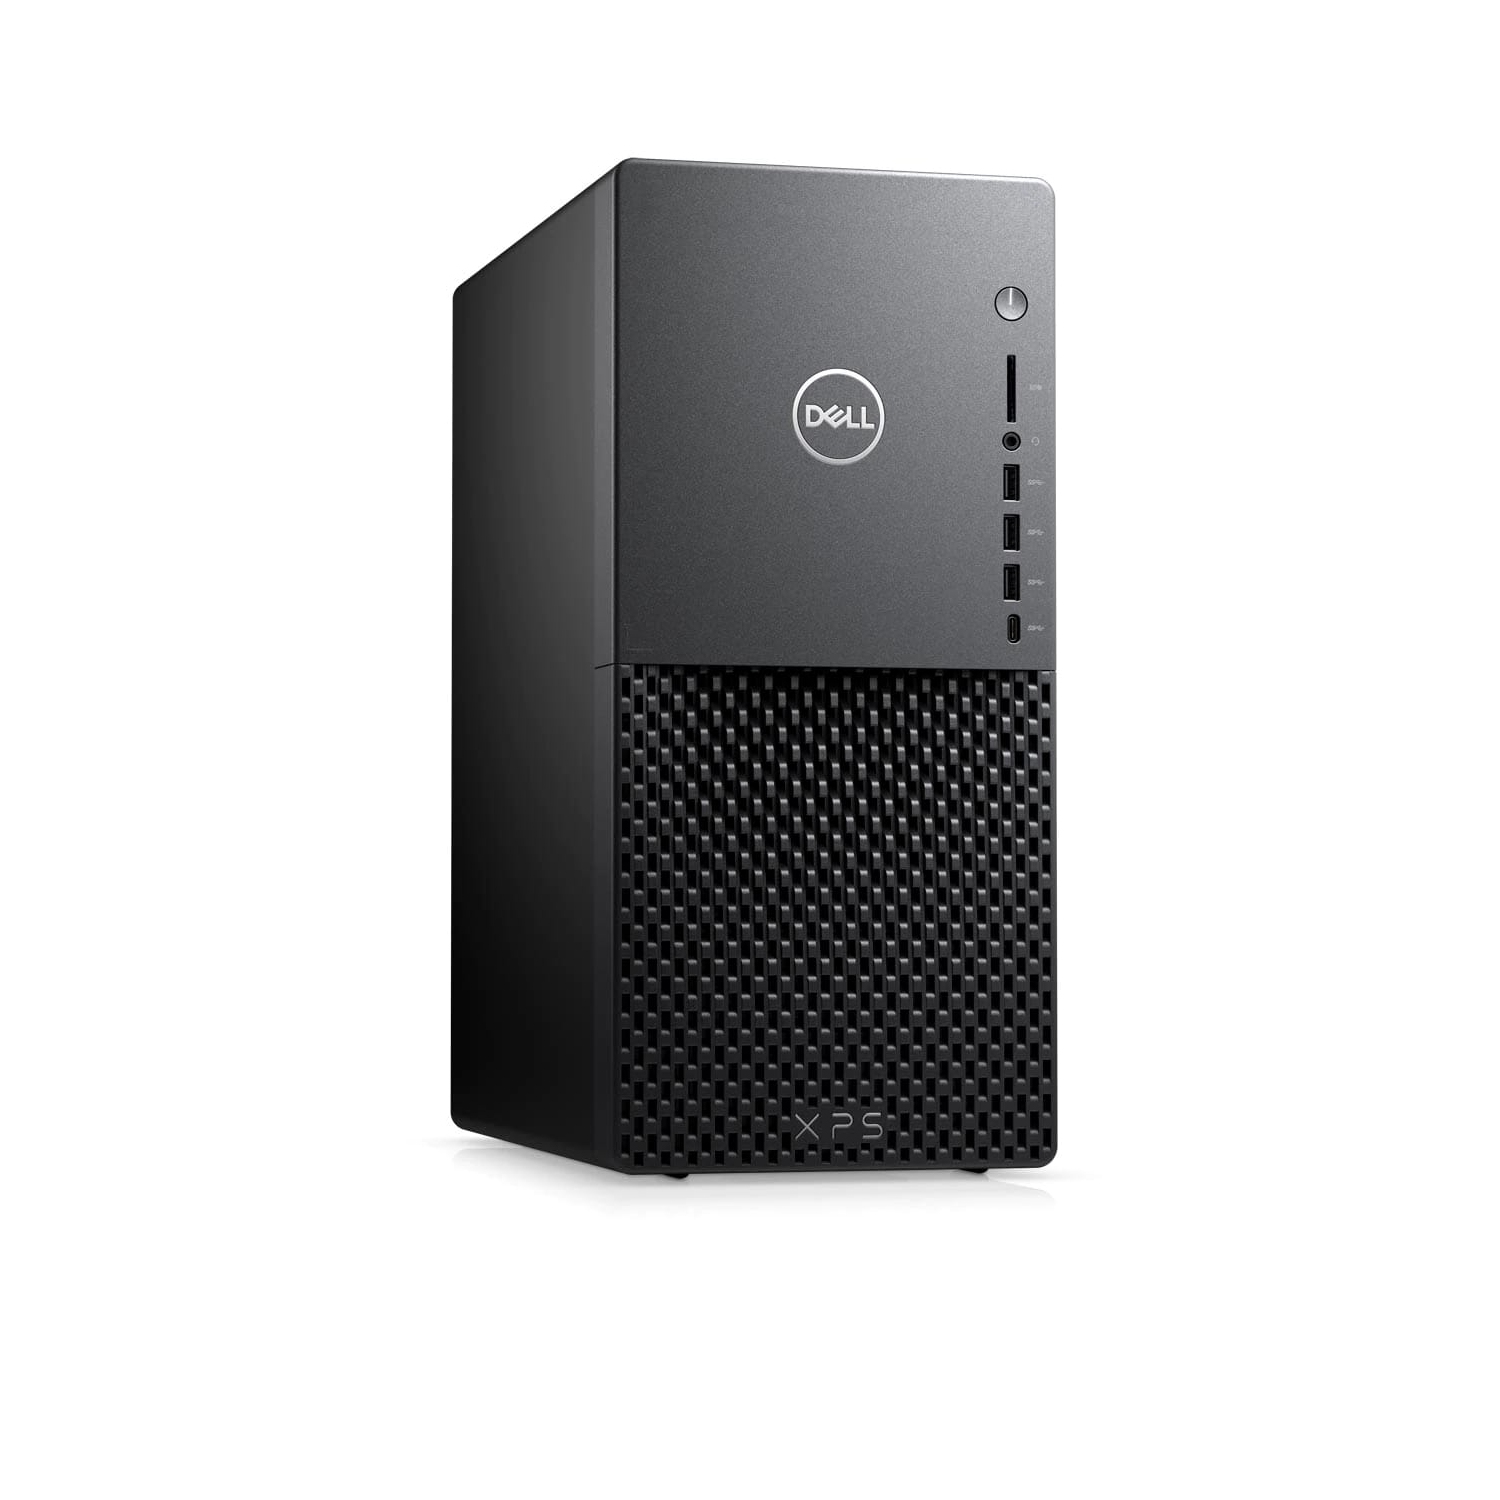 Refurbished (Excellent) - Dell XPS 8940 Desktop (2020) | Core i7 - 1TB HDD - 32GB RAM - 1660 Ti | 8 Cores @ 4.9 GHz - 11th Gen CPU Certified Refurbished